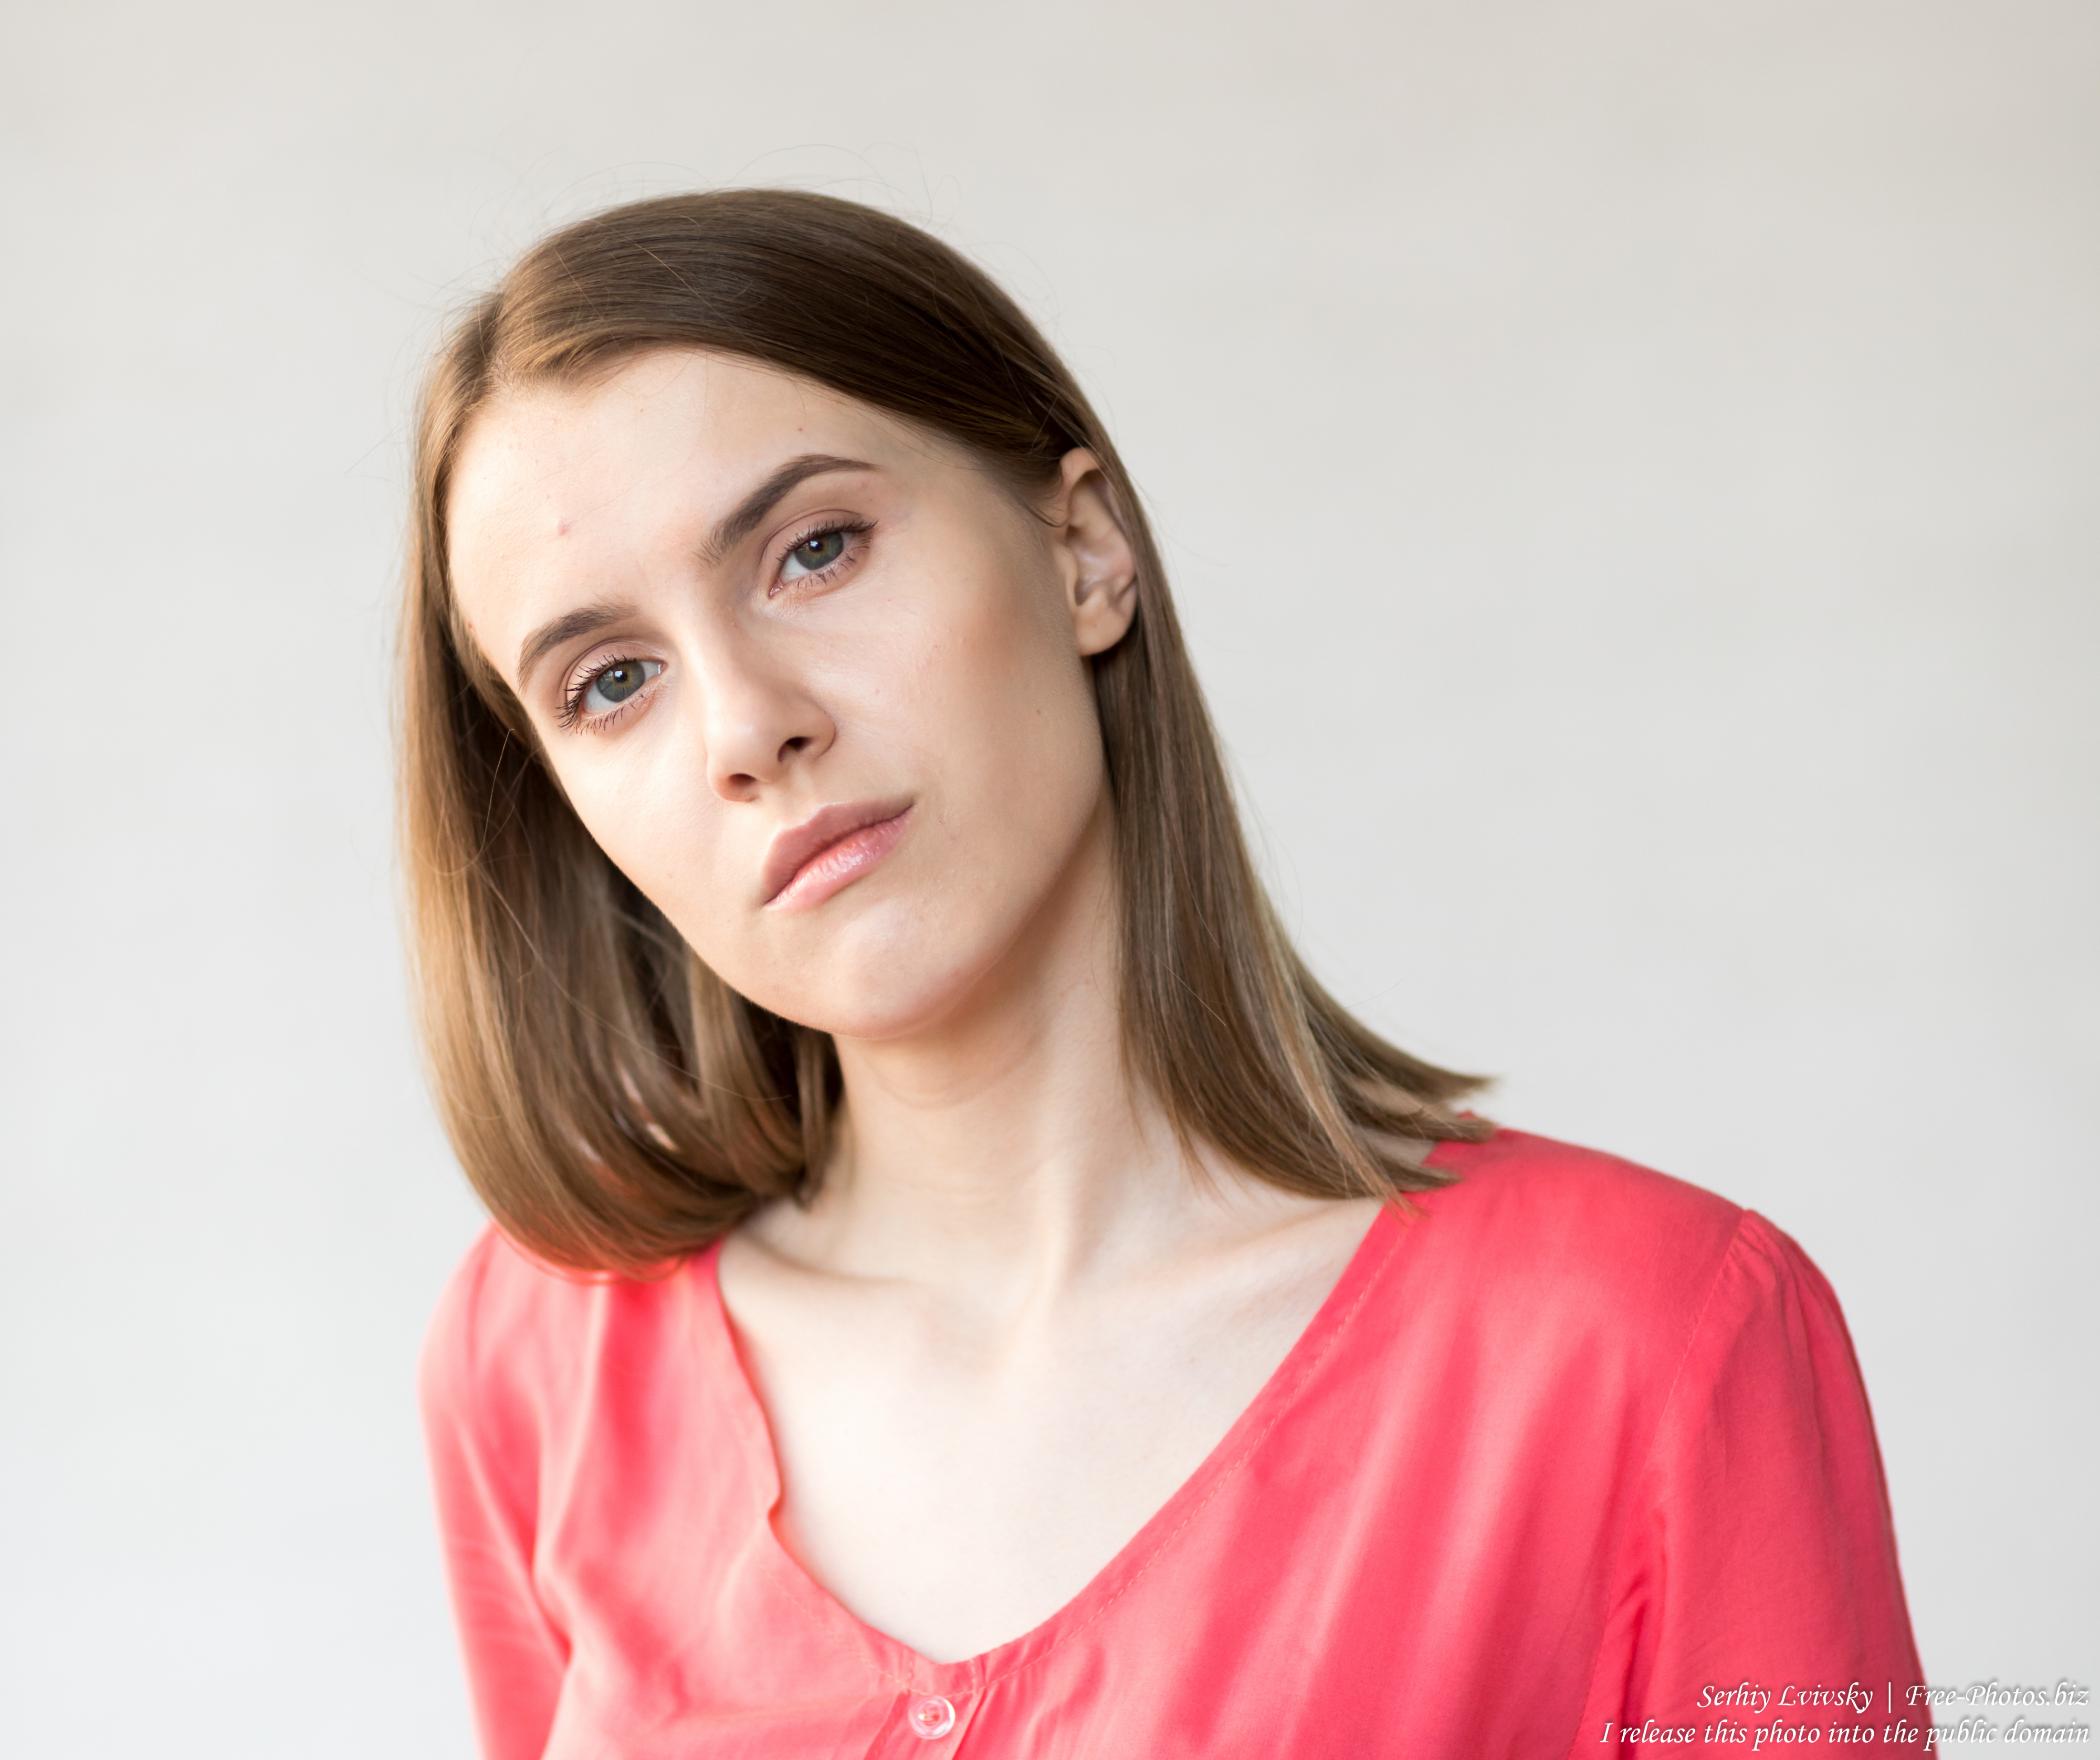 The Public Domain Portraits Of Nastia A 25 Year Old Girl Photographed By Serhiy Lvivsky